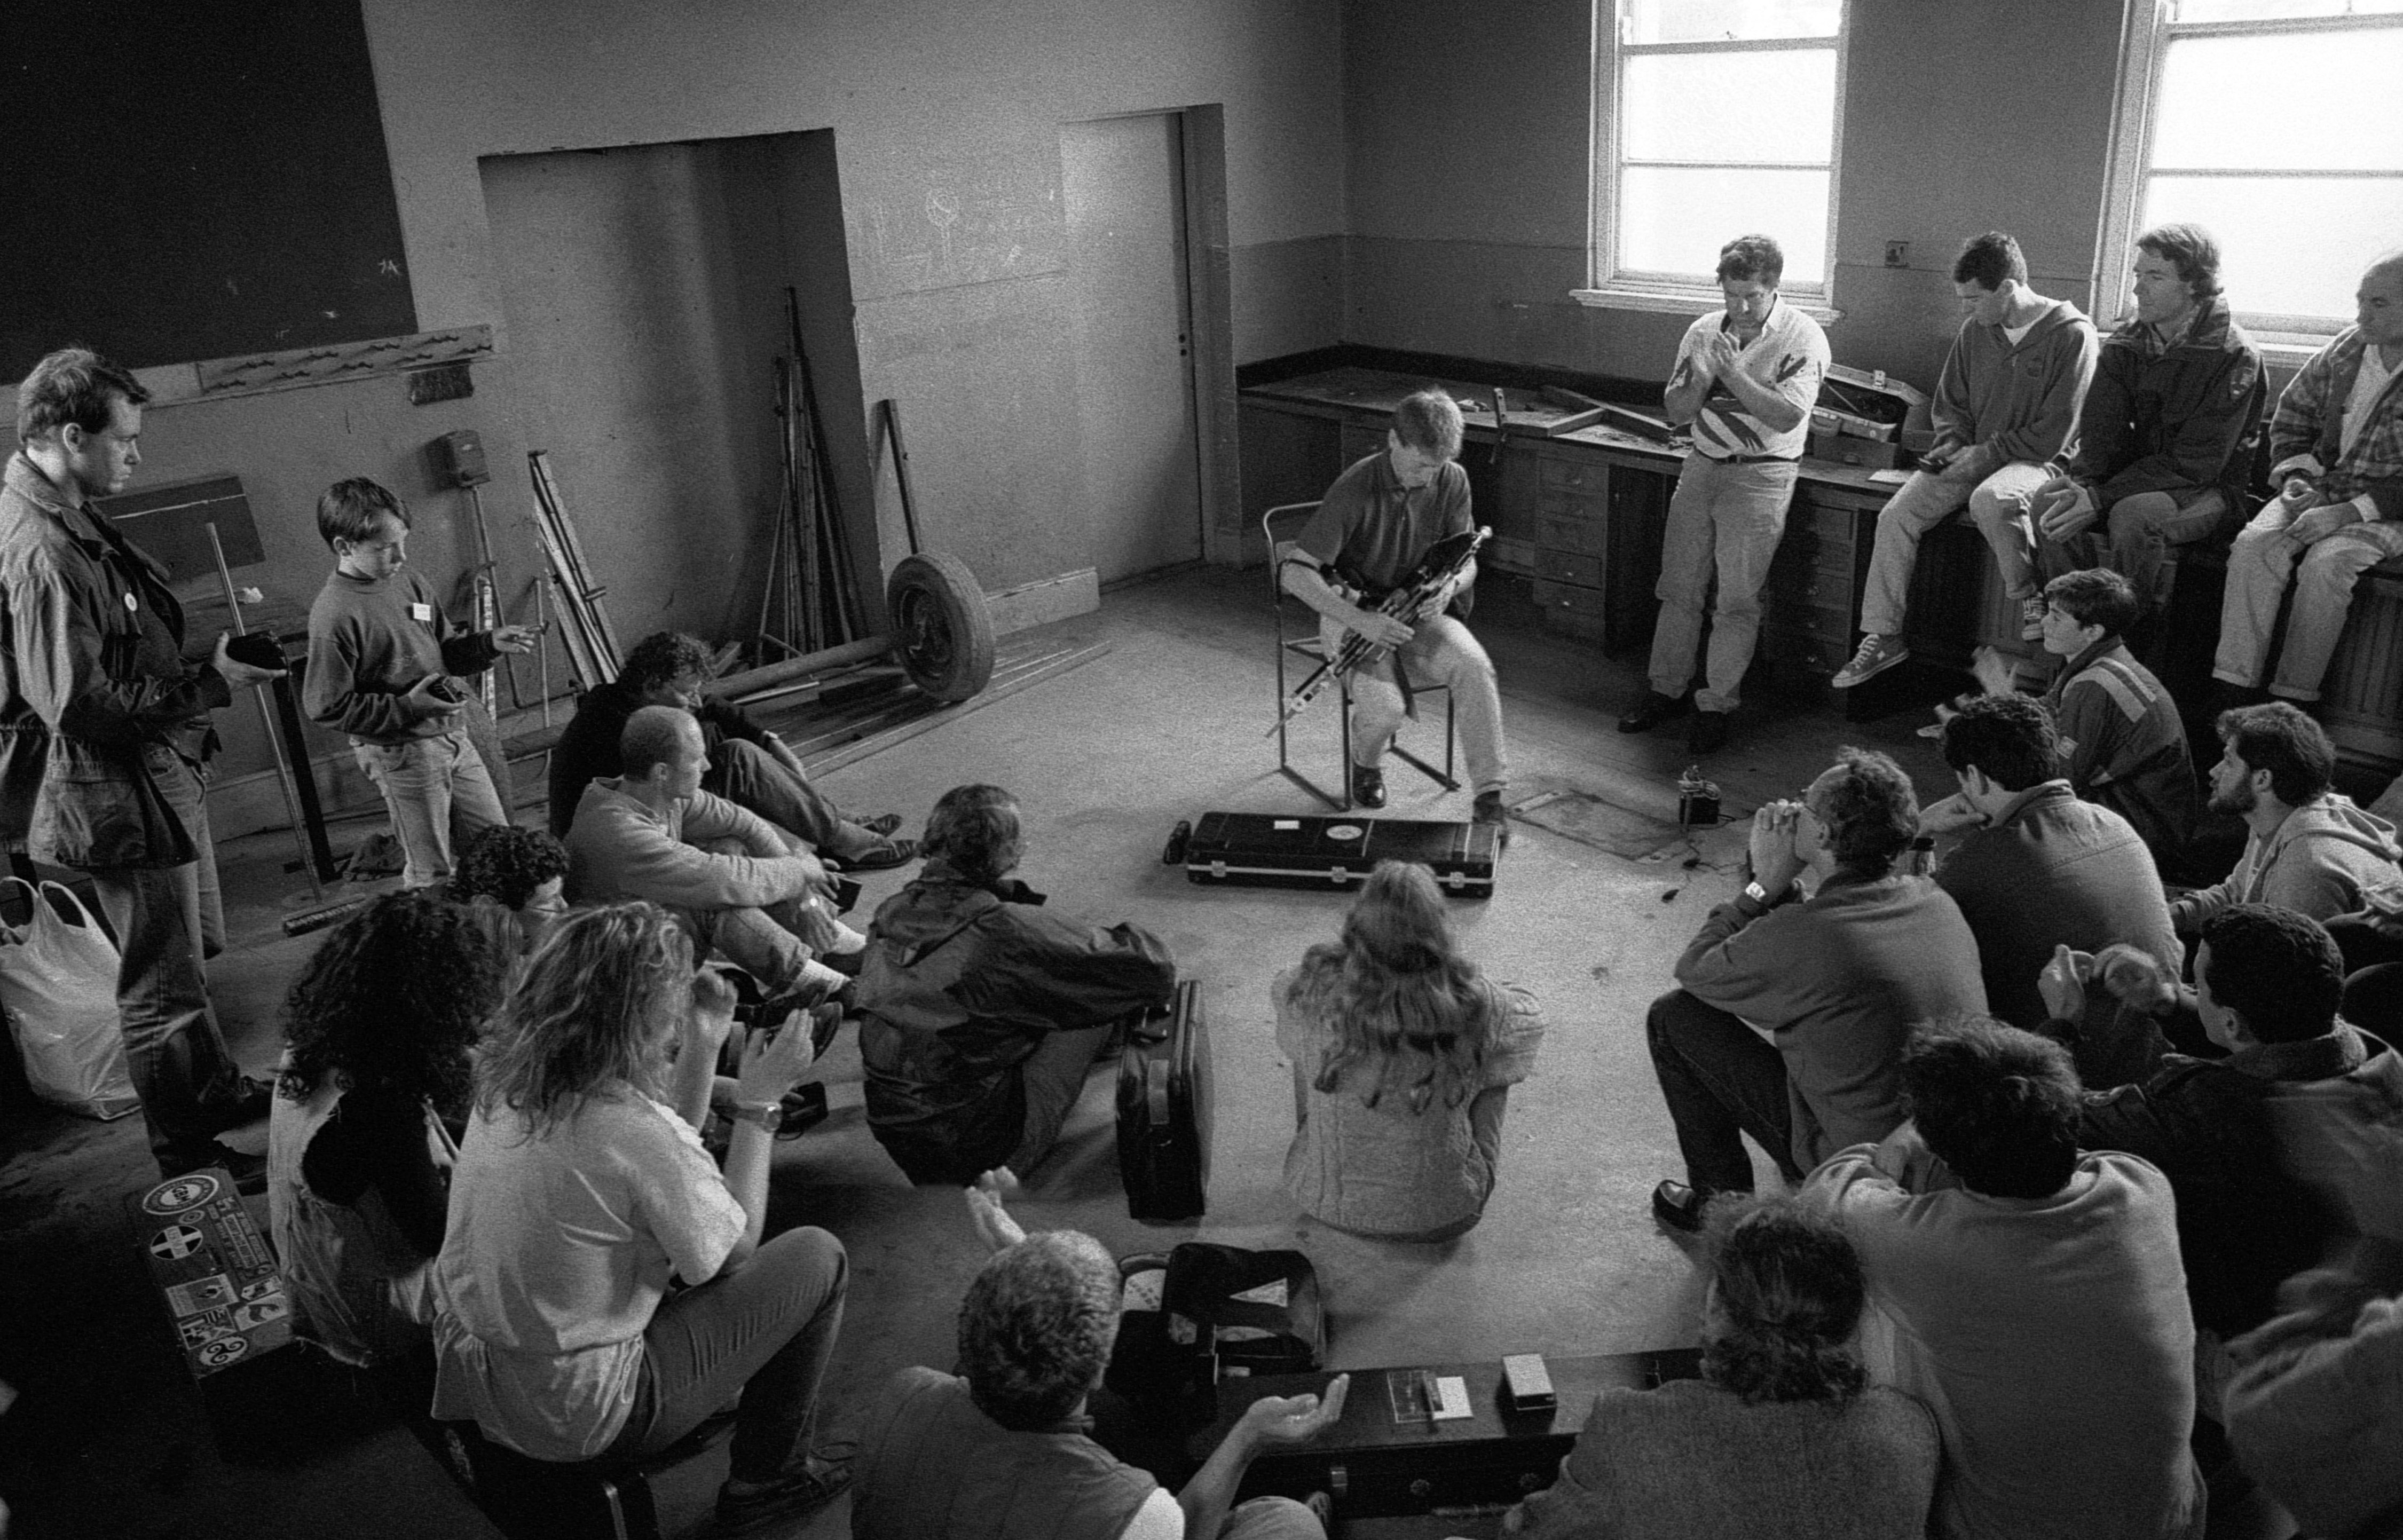 New Documentary on Willie Clancy Summer School to be Premiered Online This Weekend